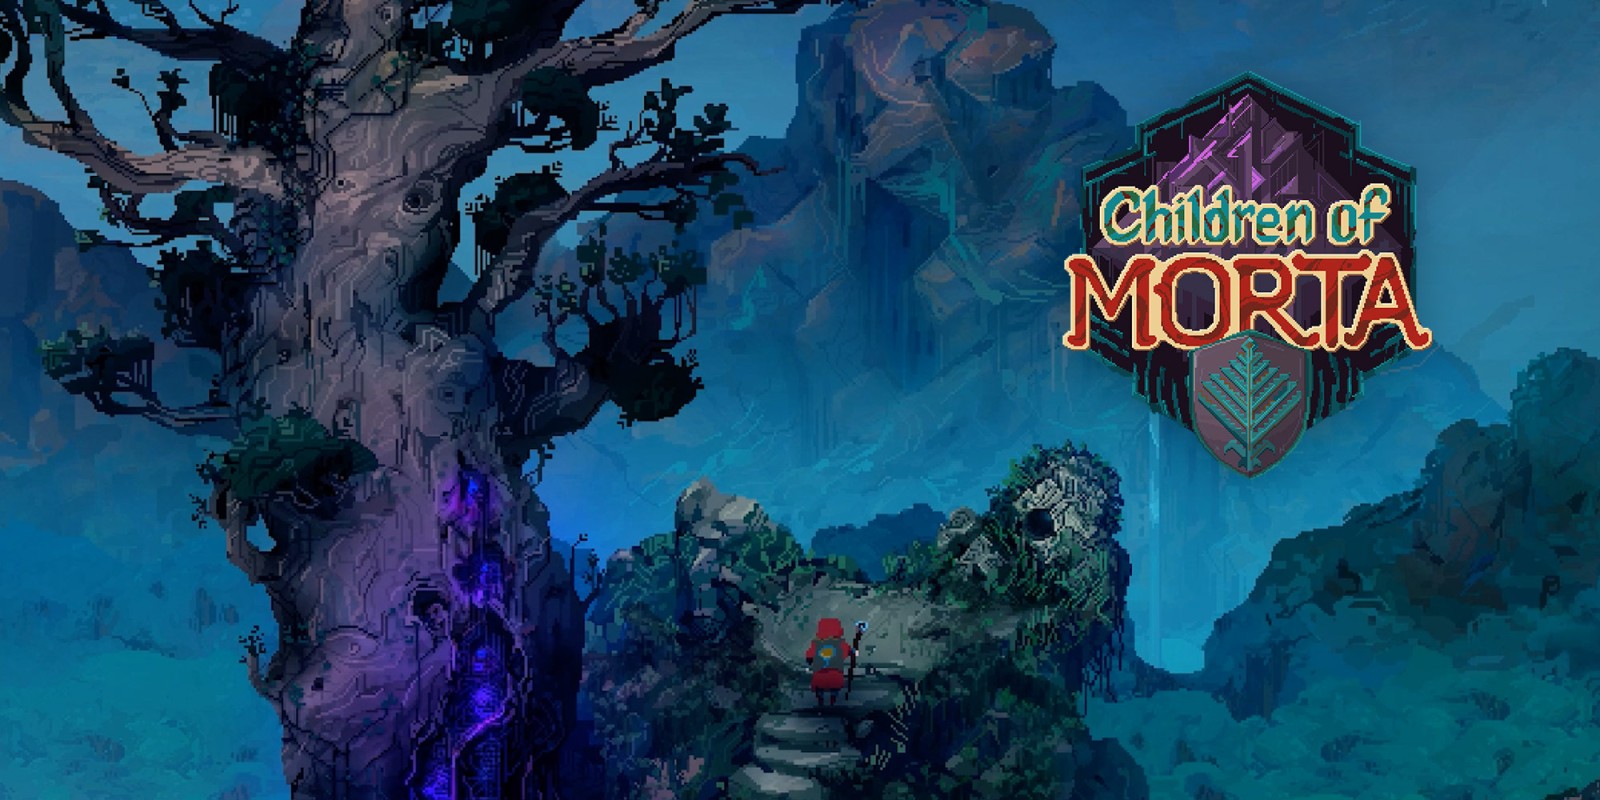 Children Of Morta Mixes Fantasy, Combat, And Family With Their Rich Storyline